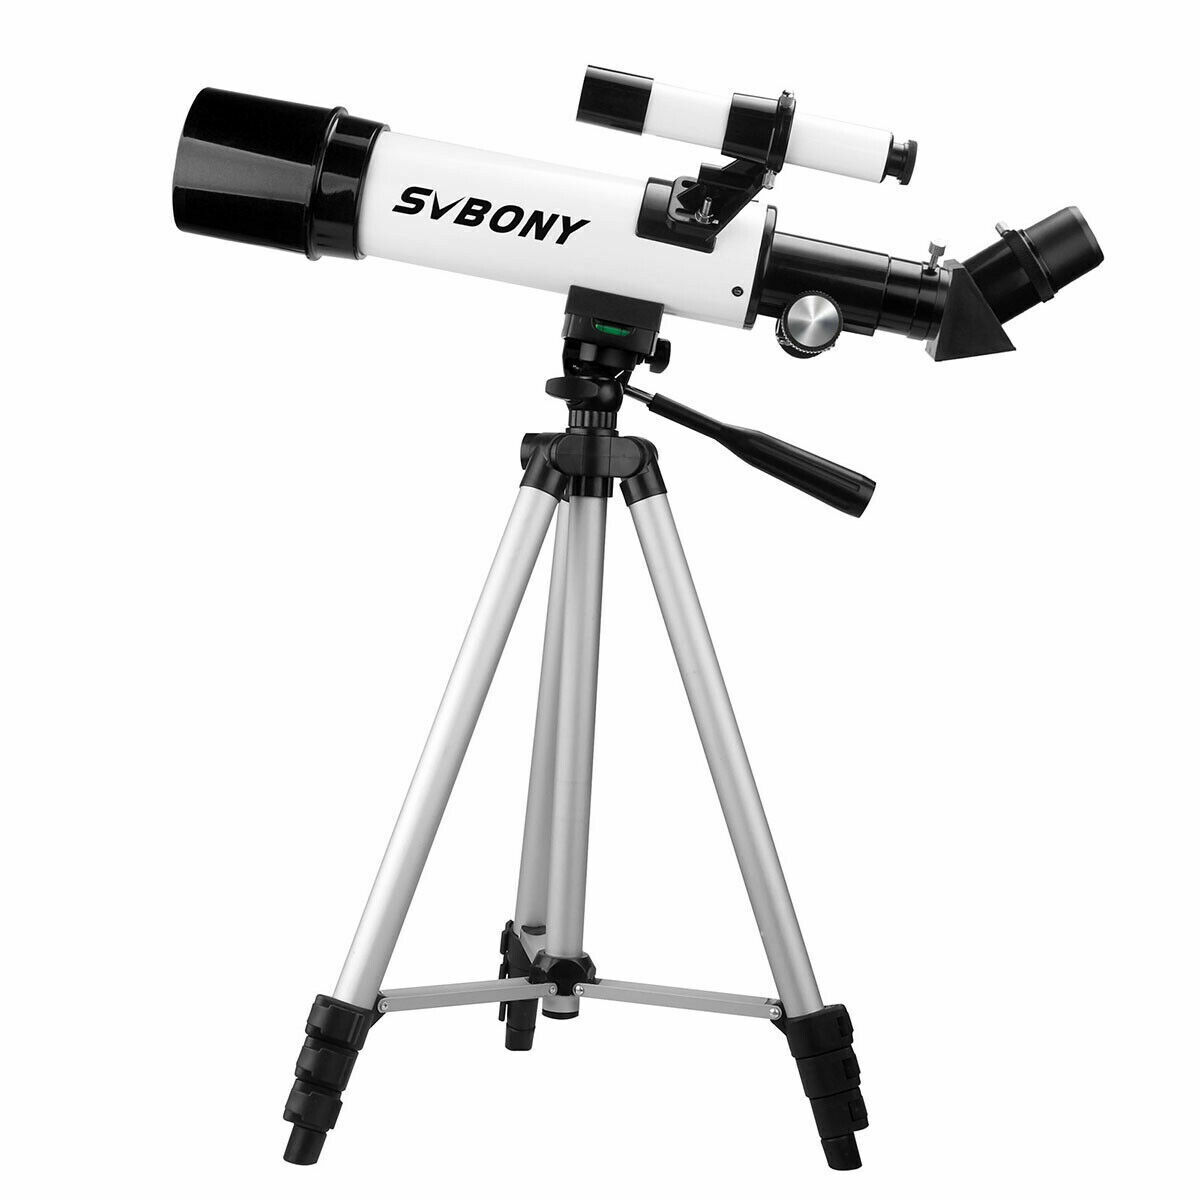 SVBONY SV501P 60400 Astronomical Telescope suit for Beginner & student Moon view